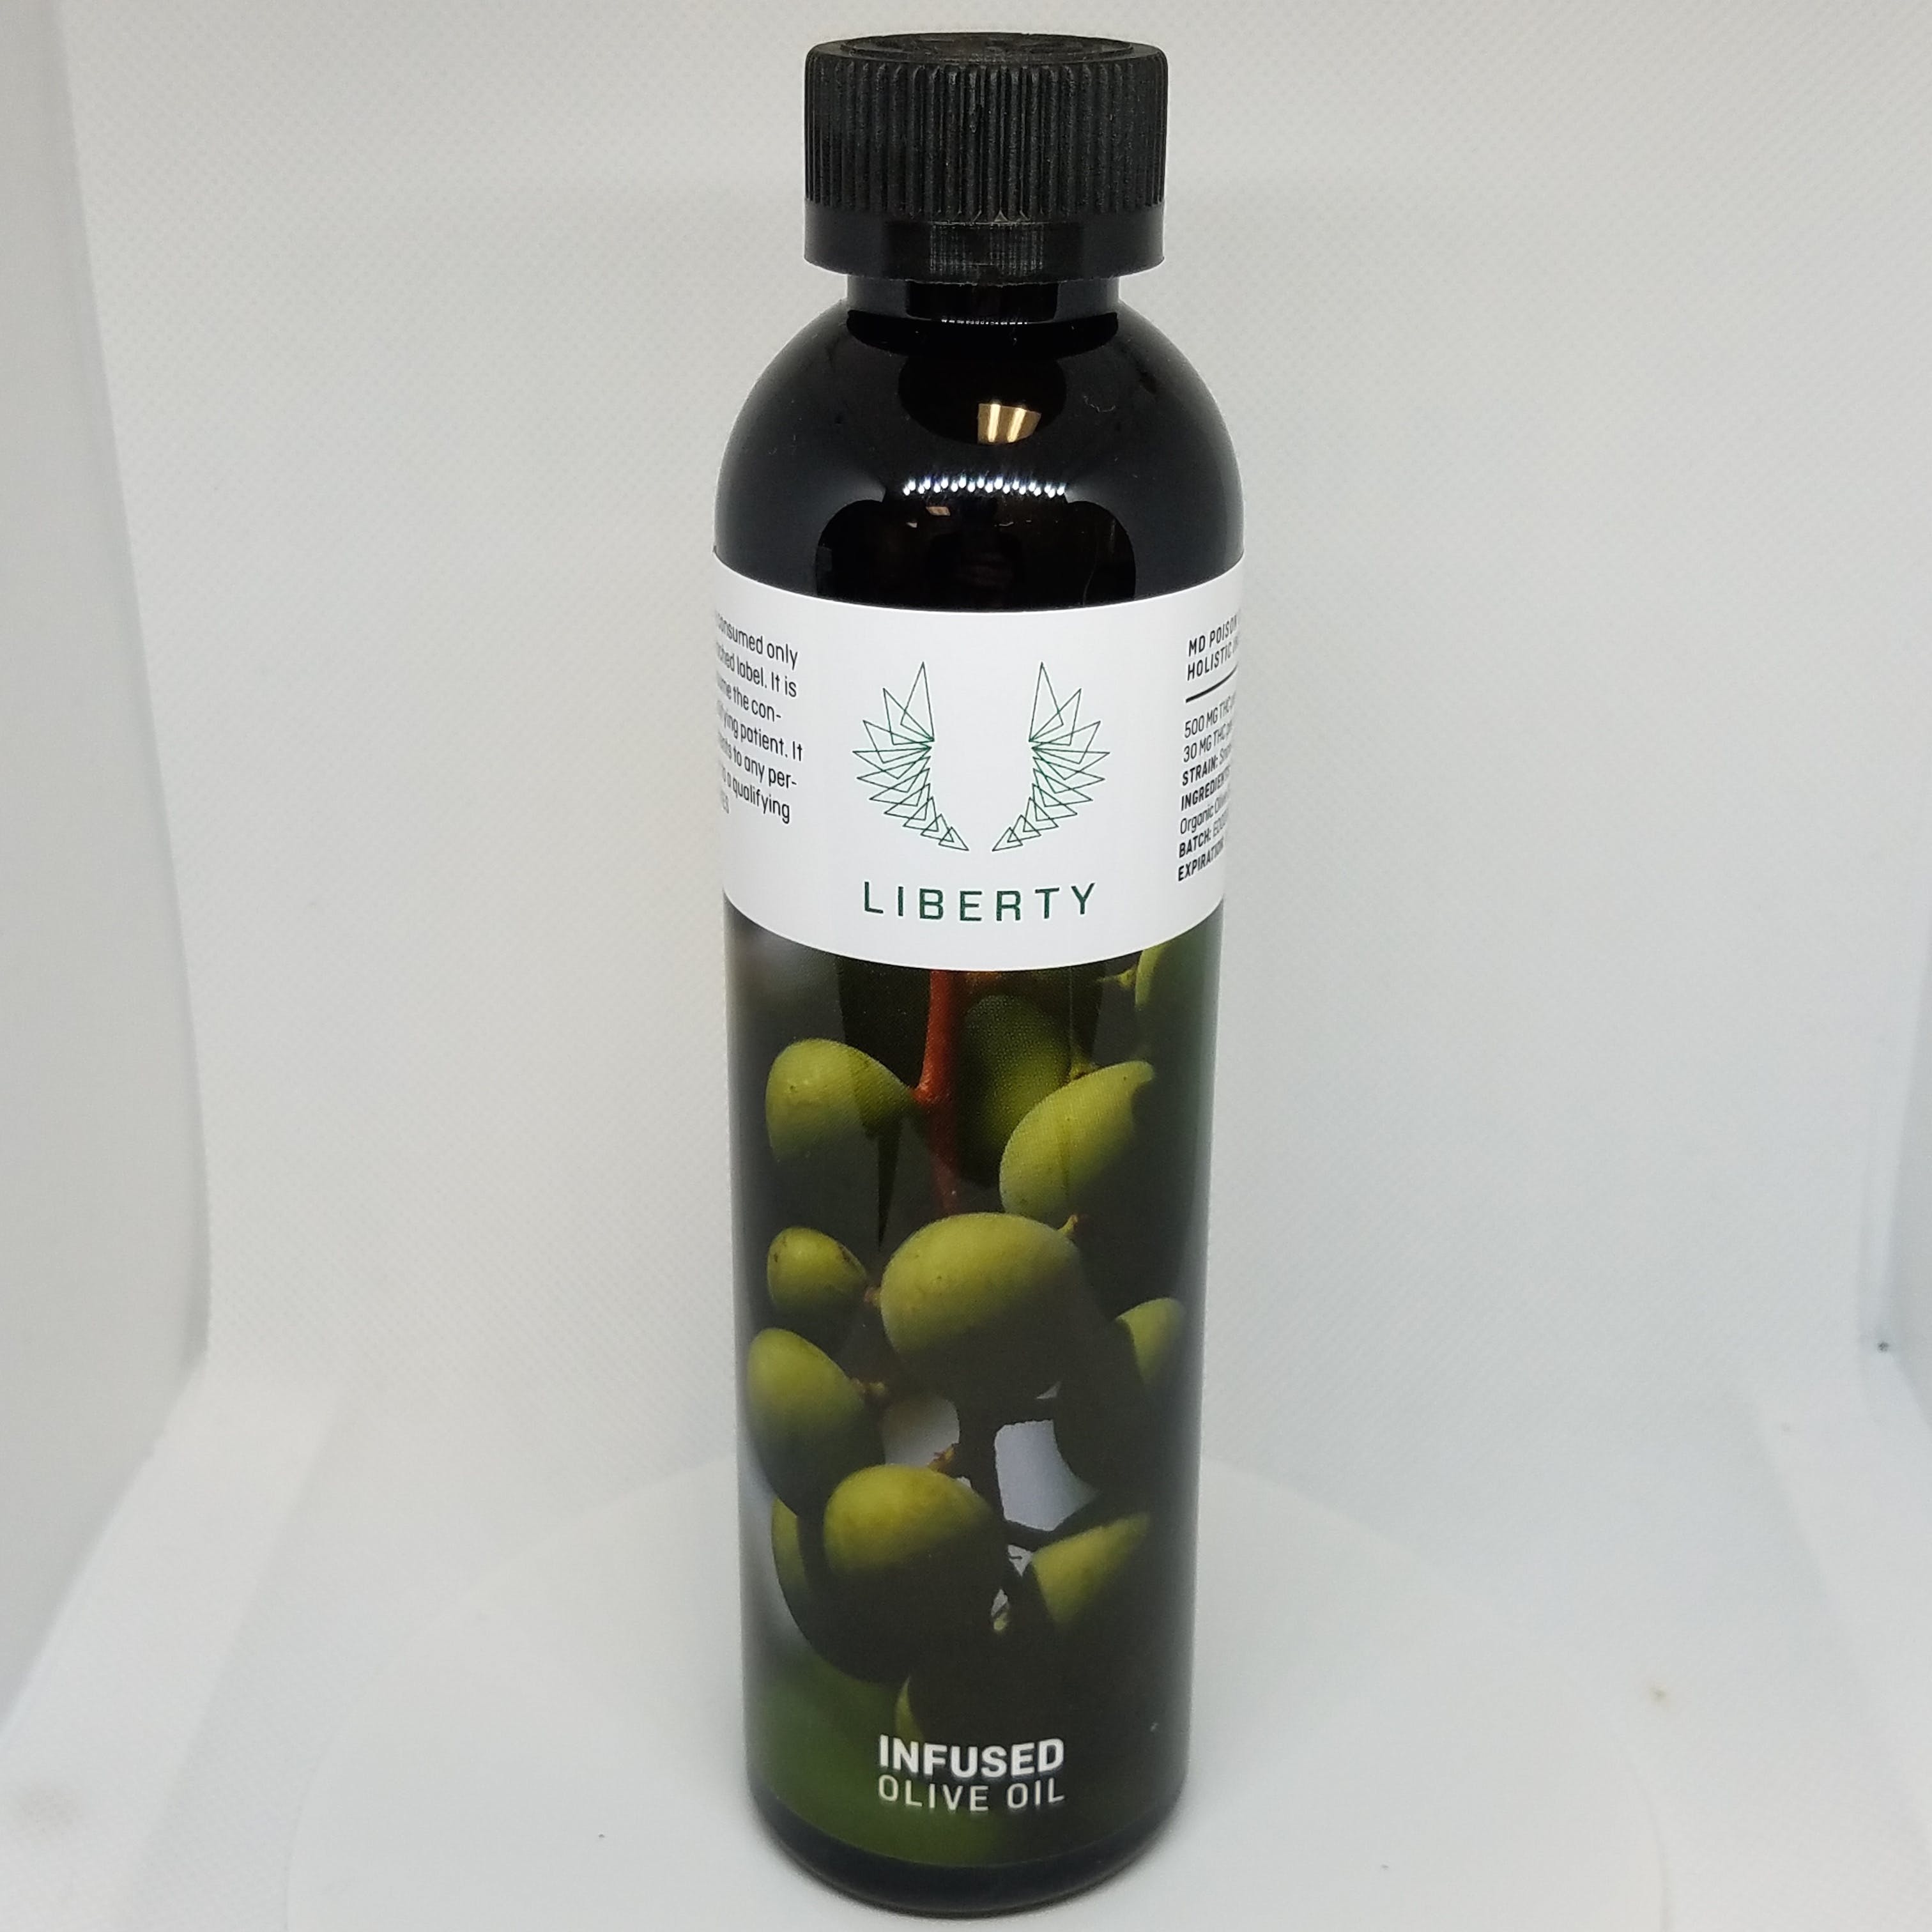 Infused Olive Oil by Liberty